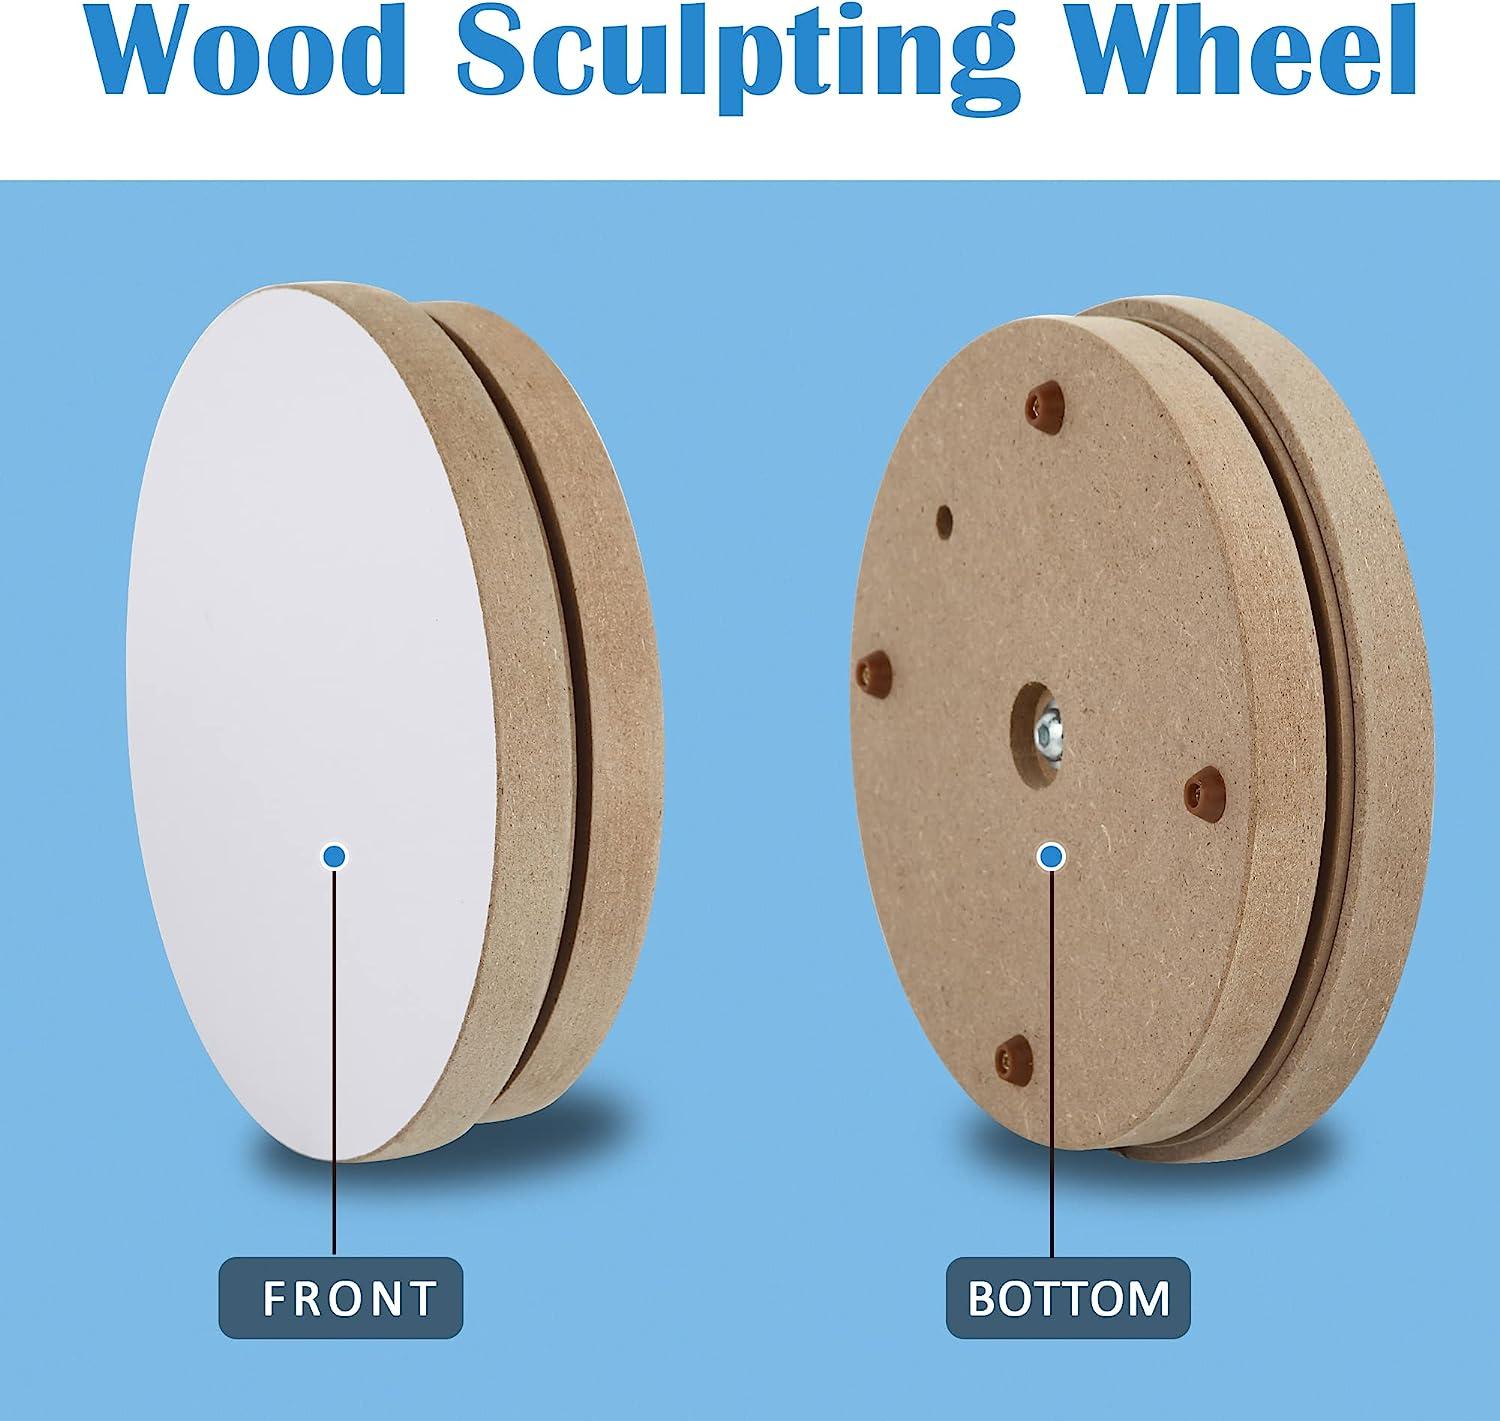 Falling in Art 8 Mini Banding Wheel, Wood Turn Table Sculpting Wheel for  Pouring, Painting, Spraying - Round Lightweight Sculpting Stand Wood Base  for Detailed Shows/Cake Decorating 8 inches